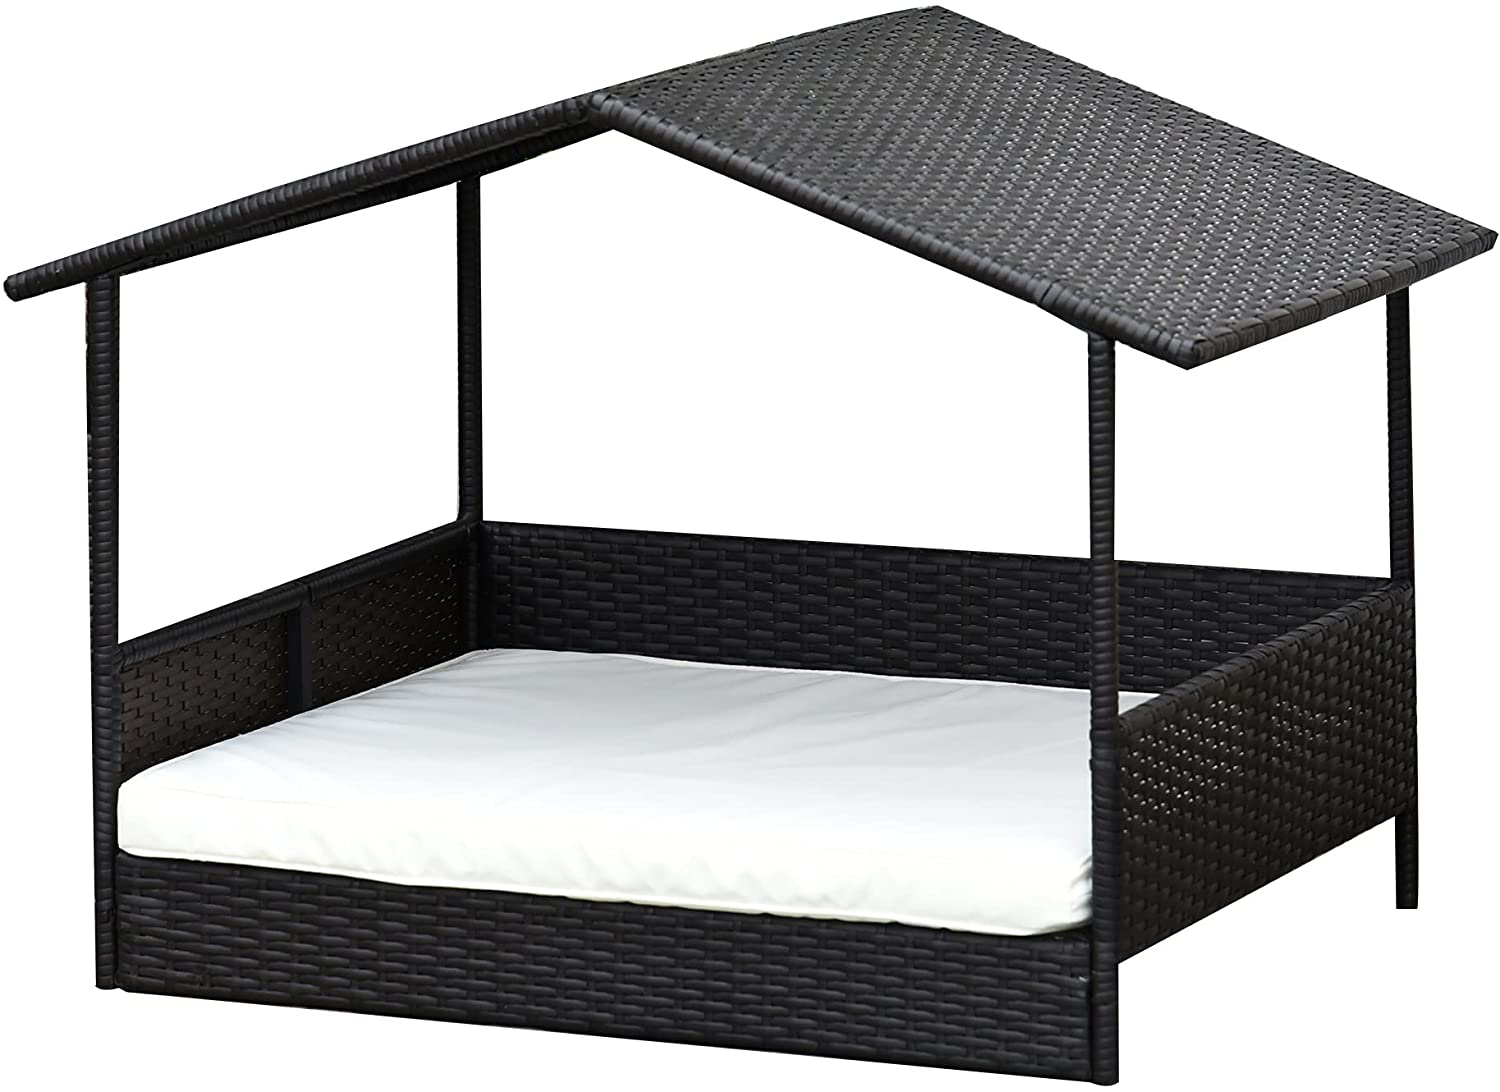 Pawhut Wicker Dog House Raised Rattan Bed for Indoor/Outdoor with Cushion Lounge